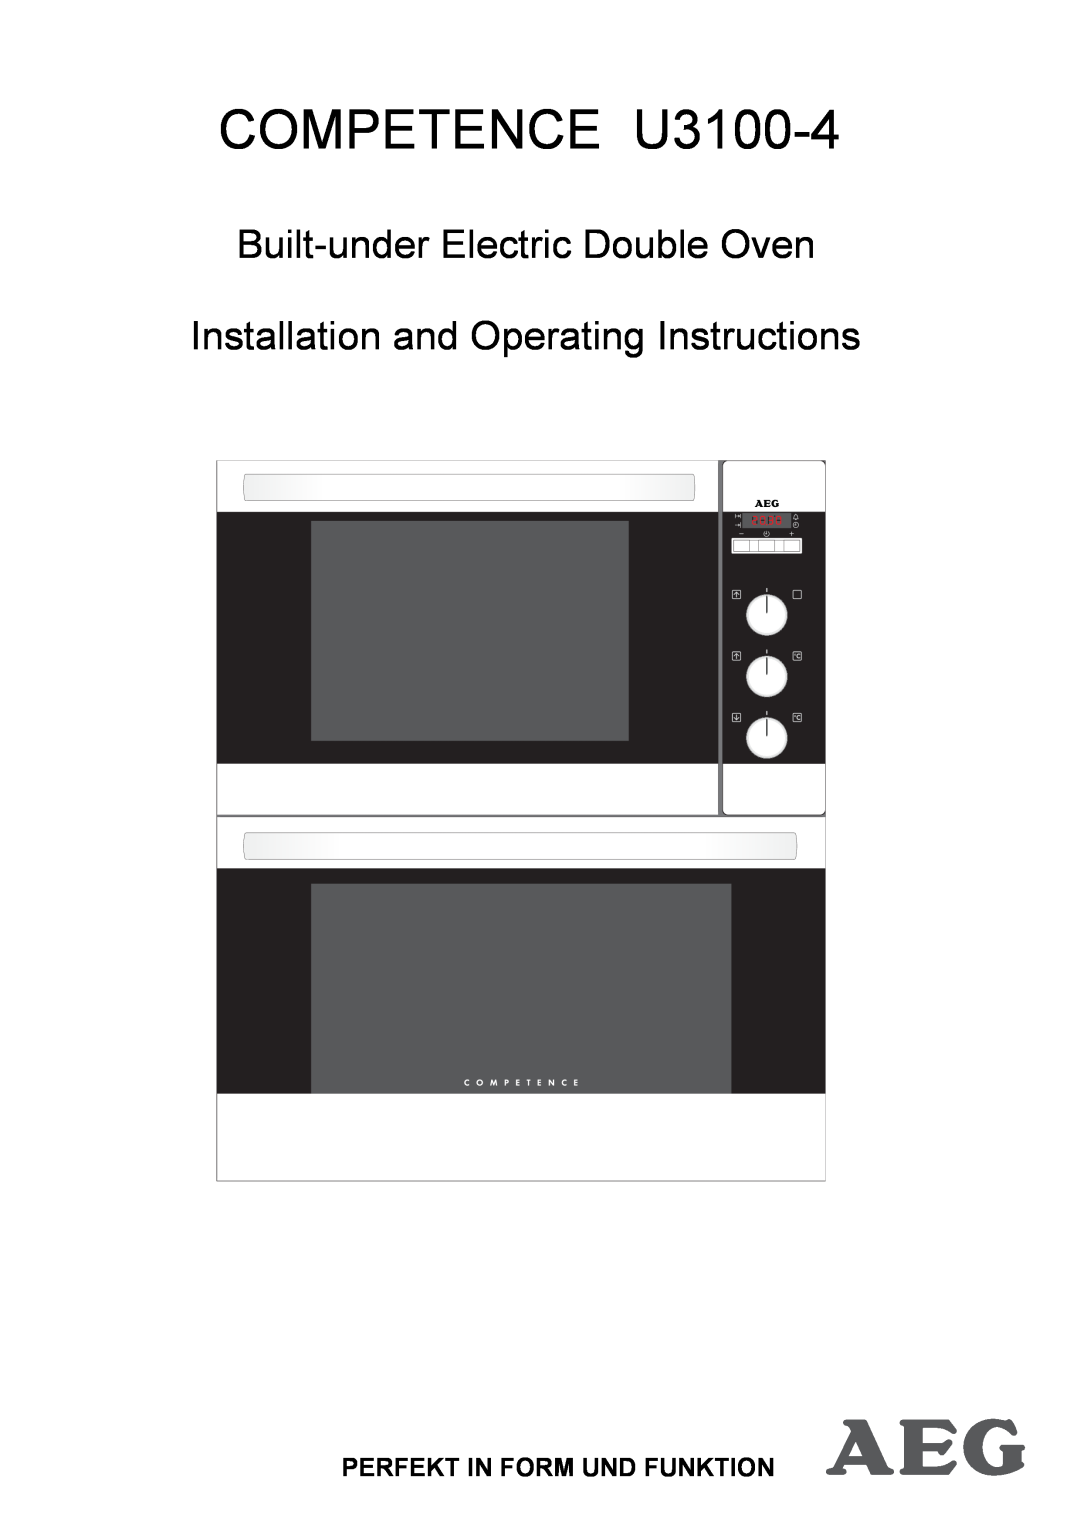 Electrolux manual Perfekt In Form Und Funktion, COMPETENCE U3100-4, Built-under Electric Double Oven 